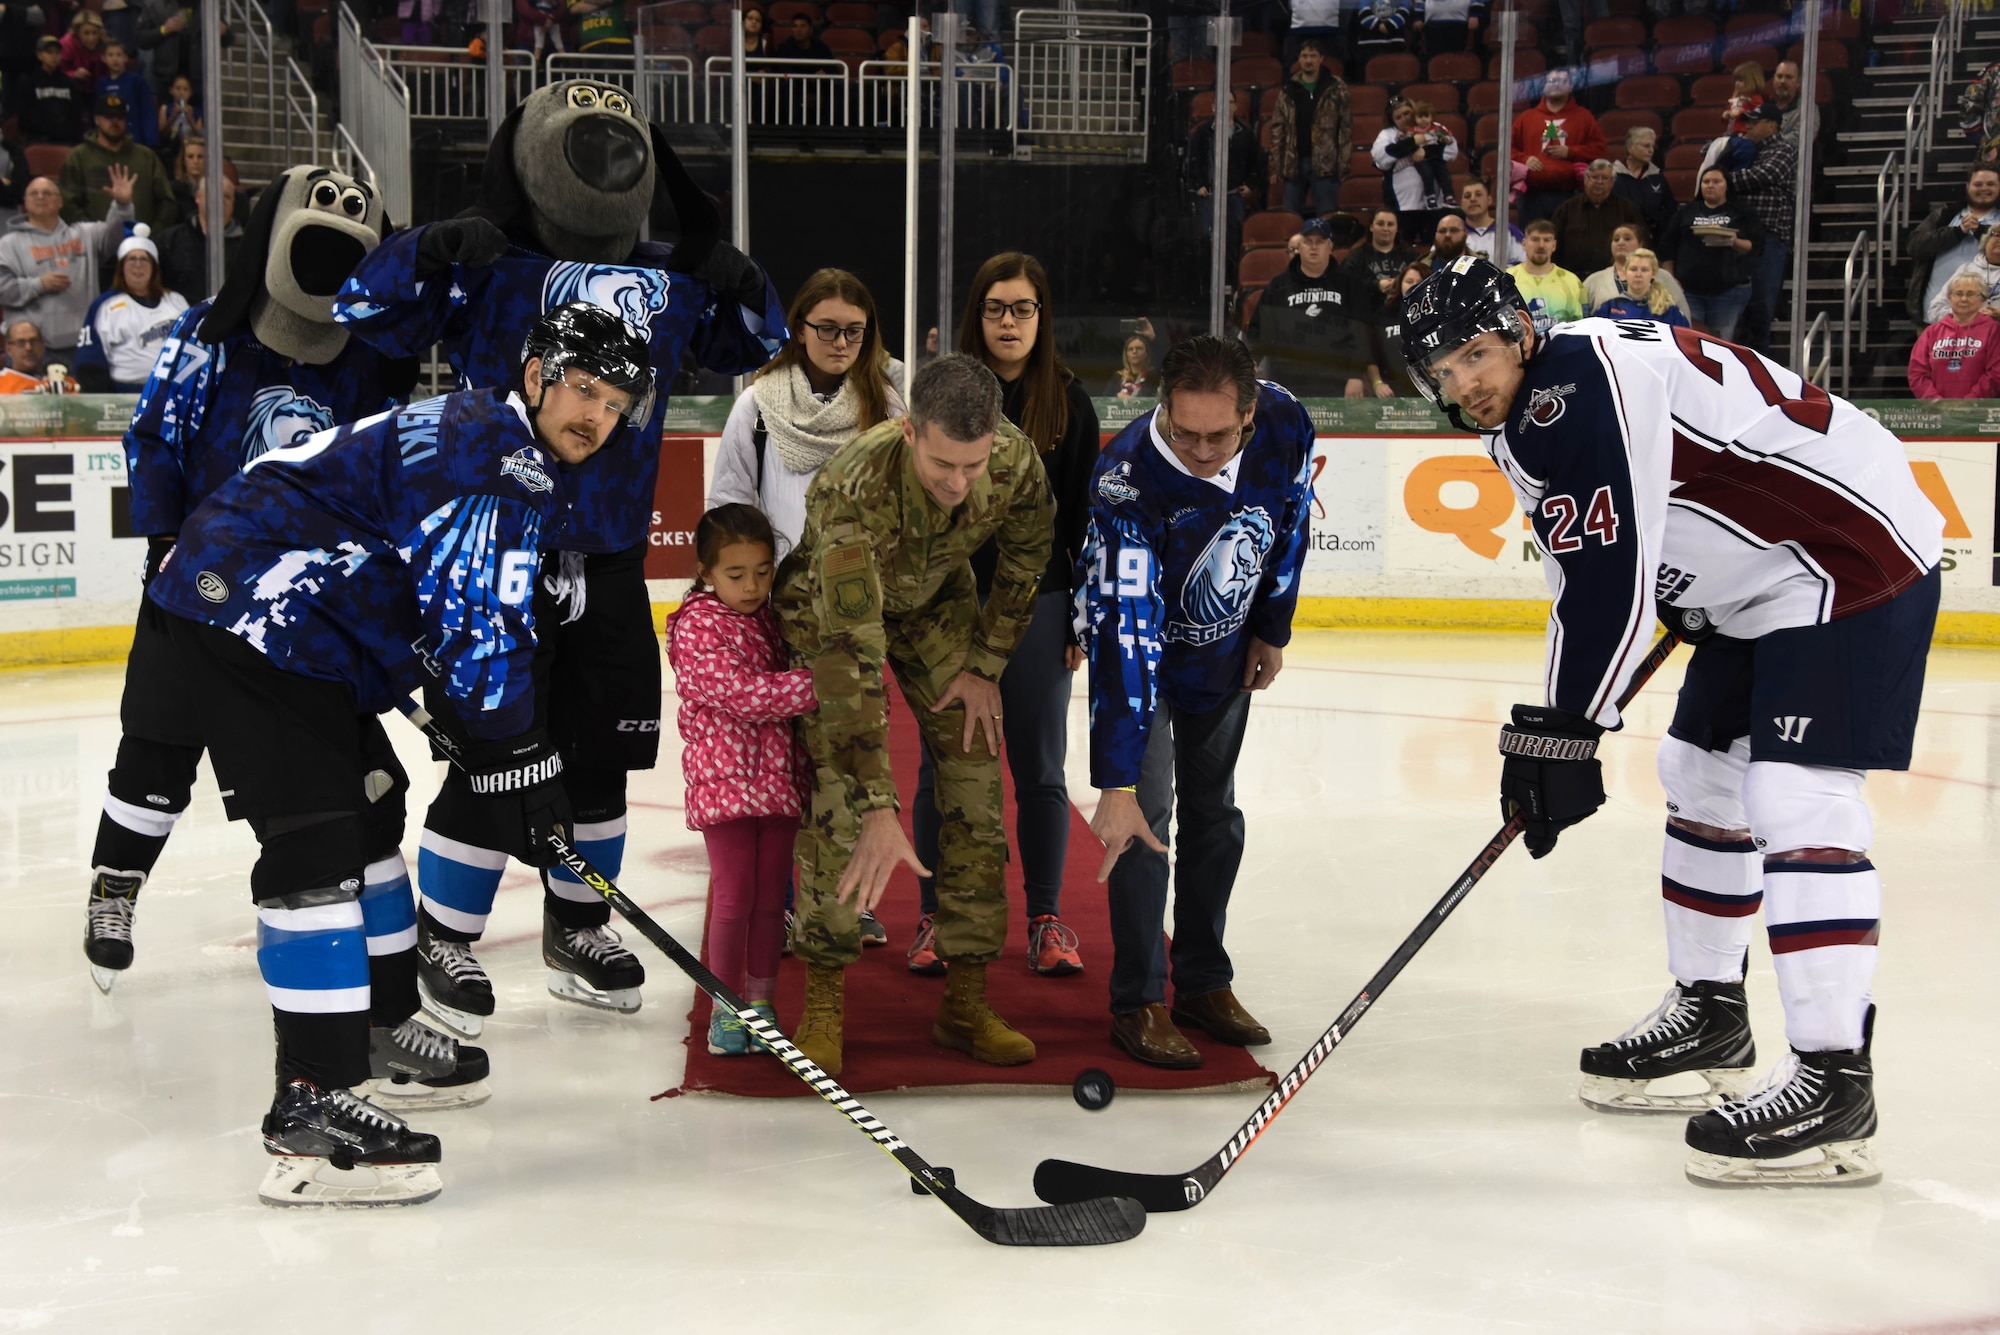 Col. Rich Tanner, 22nd Air Refueling Wing commander, and Warren Martin, Kansas Strong executive director, drop a ceremonial puck before the beginning of a hockey game between the Wichita Thunder and the Tulsa Oilers at INTRUST Bank Arena Dec. 7, 2019, in Wichita, Kan. The Wichita Thunder honored the 22nd ARW by wearing a specially designed jersey with camouflage and a Pegasus logo for Military Appreciation Night. (Air Force photo by Airman 1st Class Marc A. Garcia)